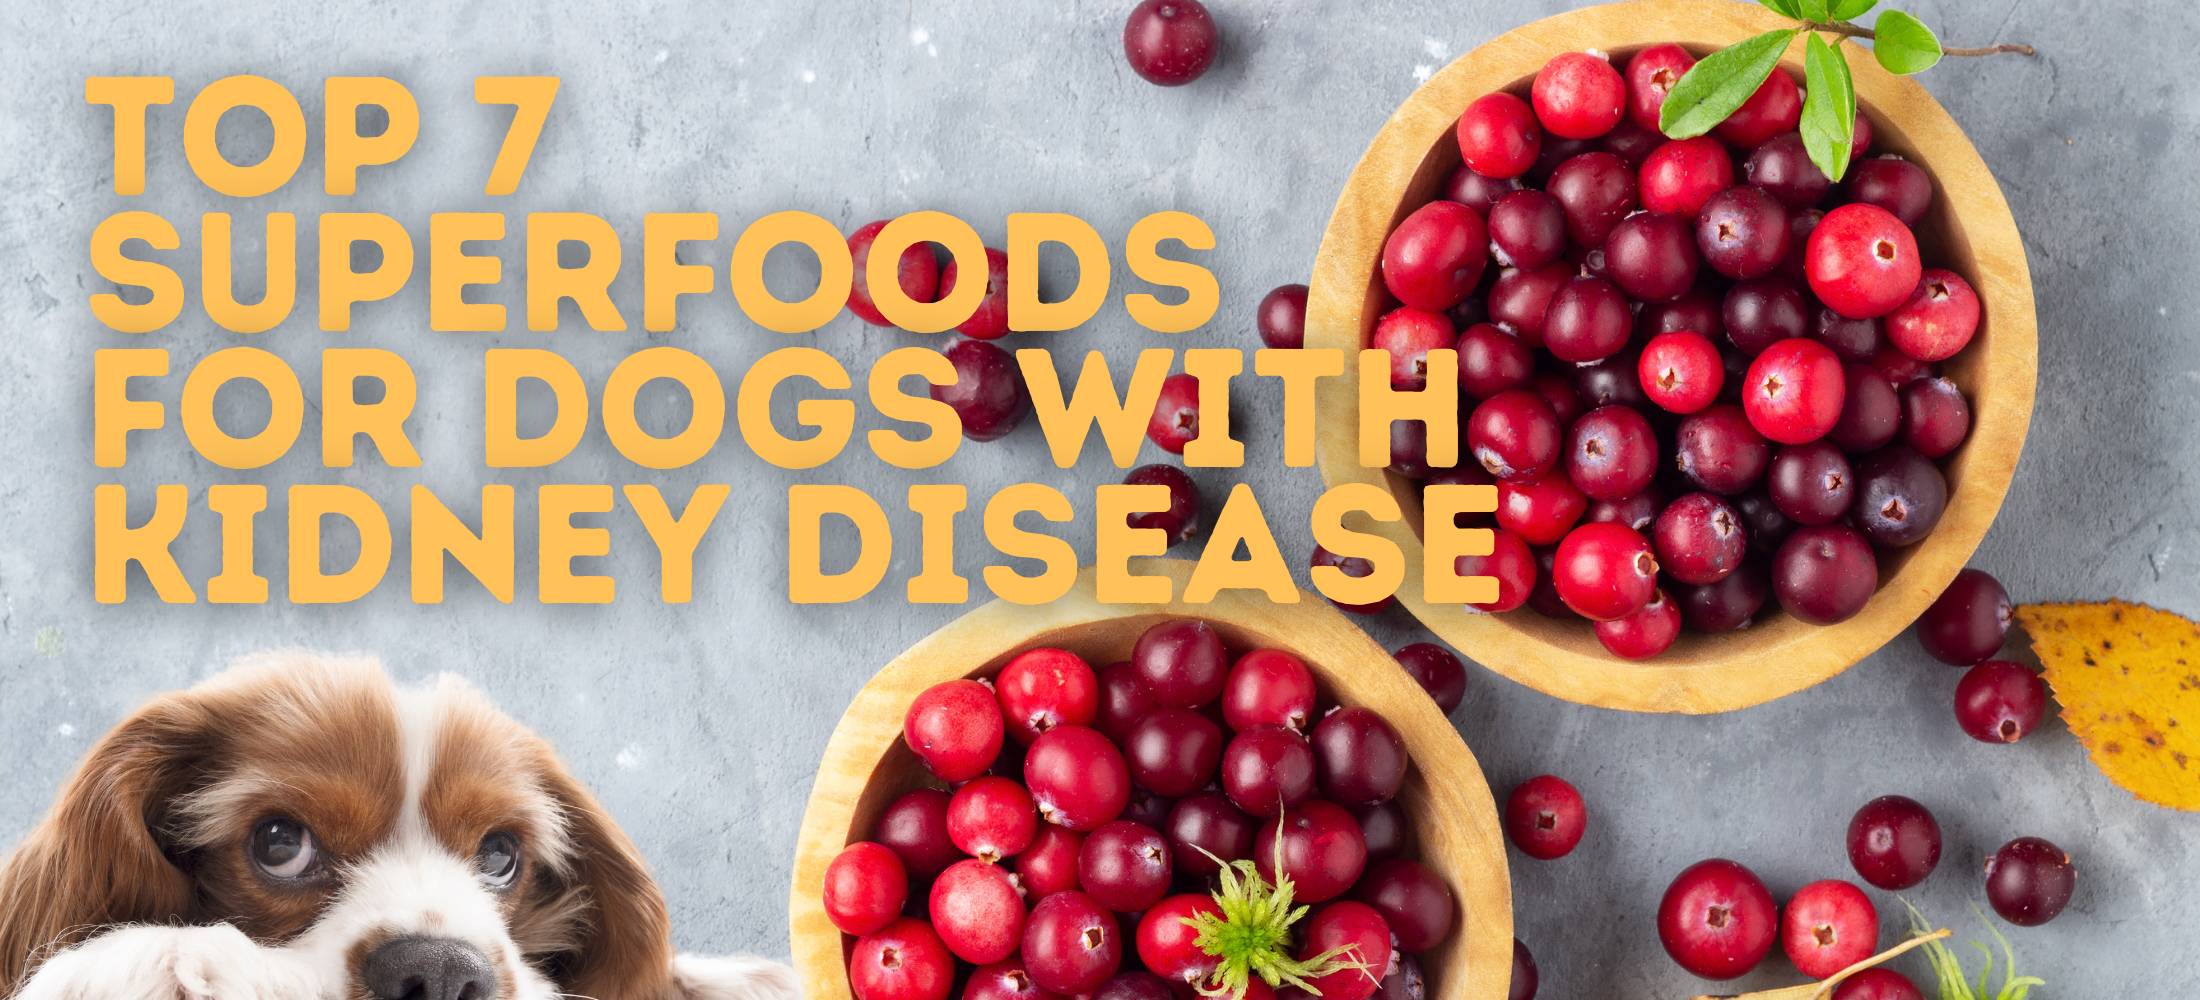 Top 7 Superfoods For Dogs With Kidney Disease